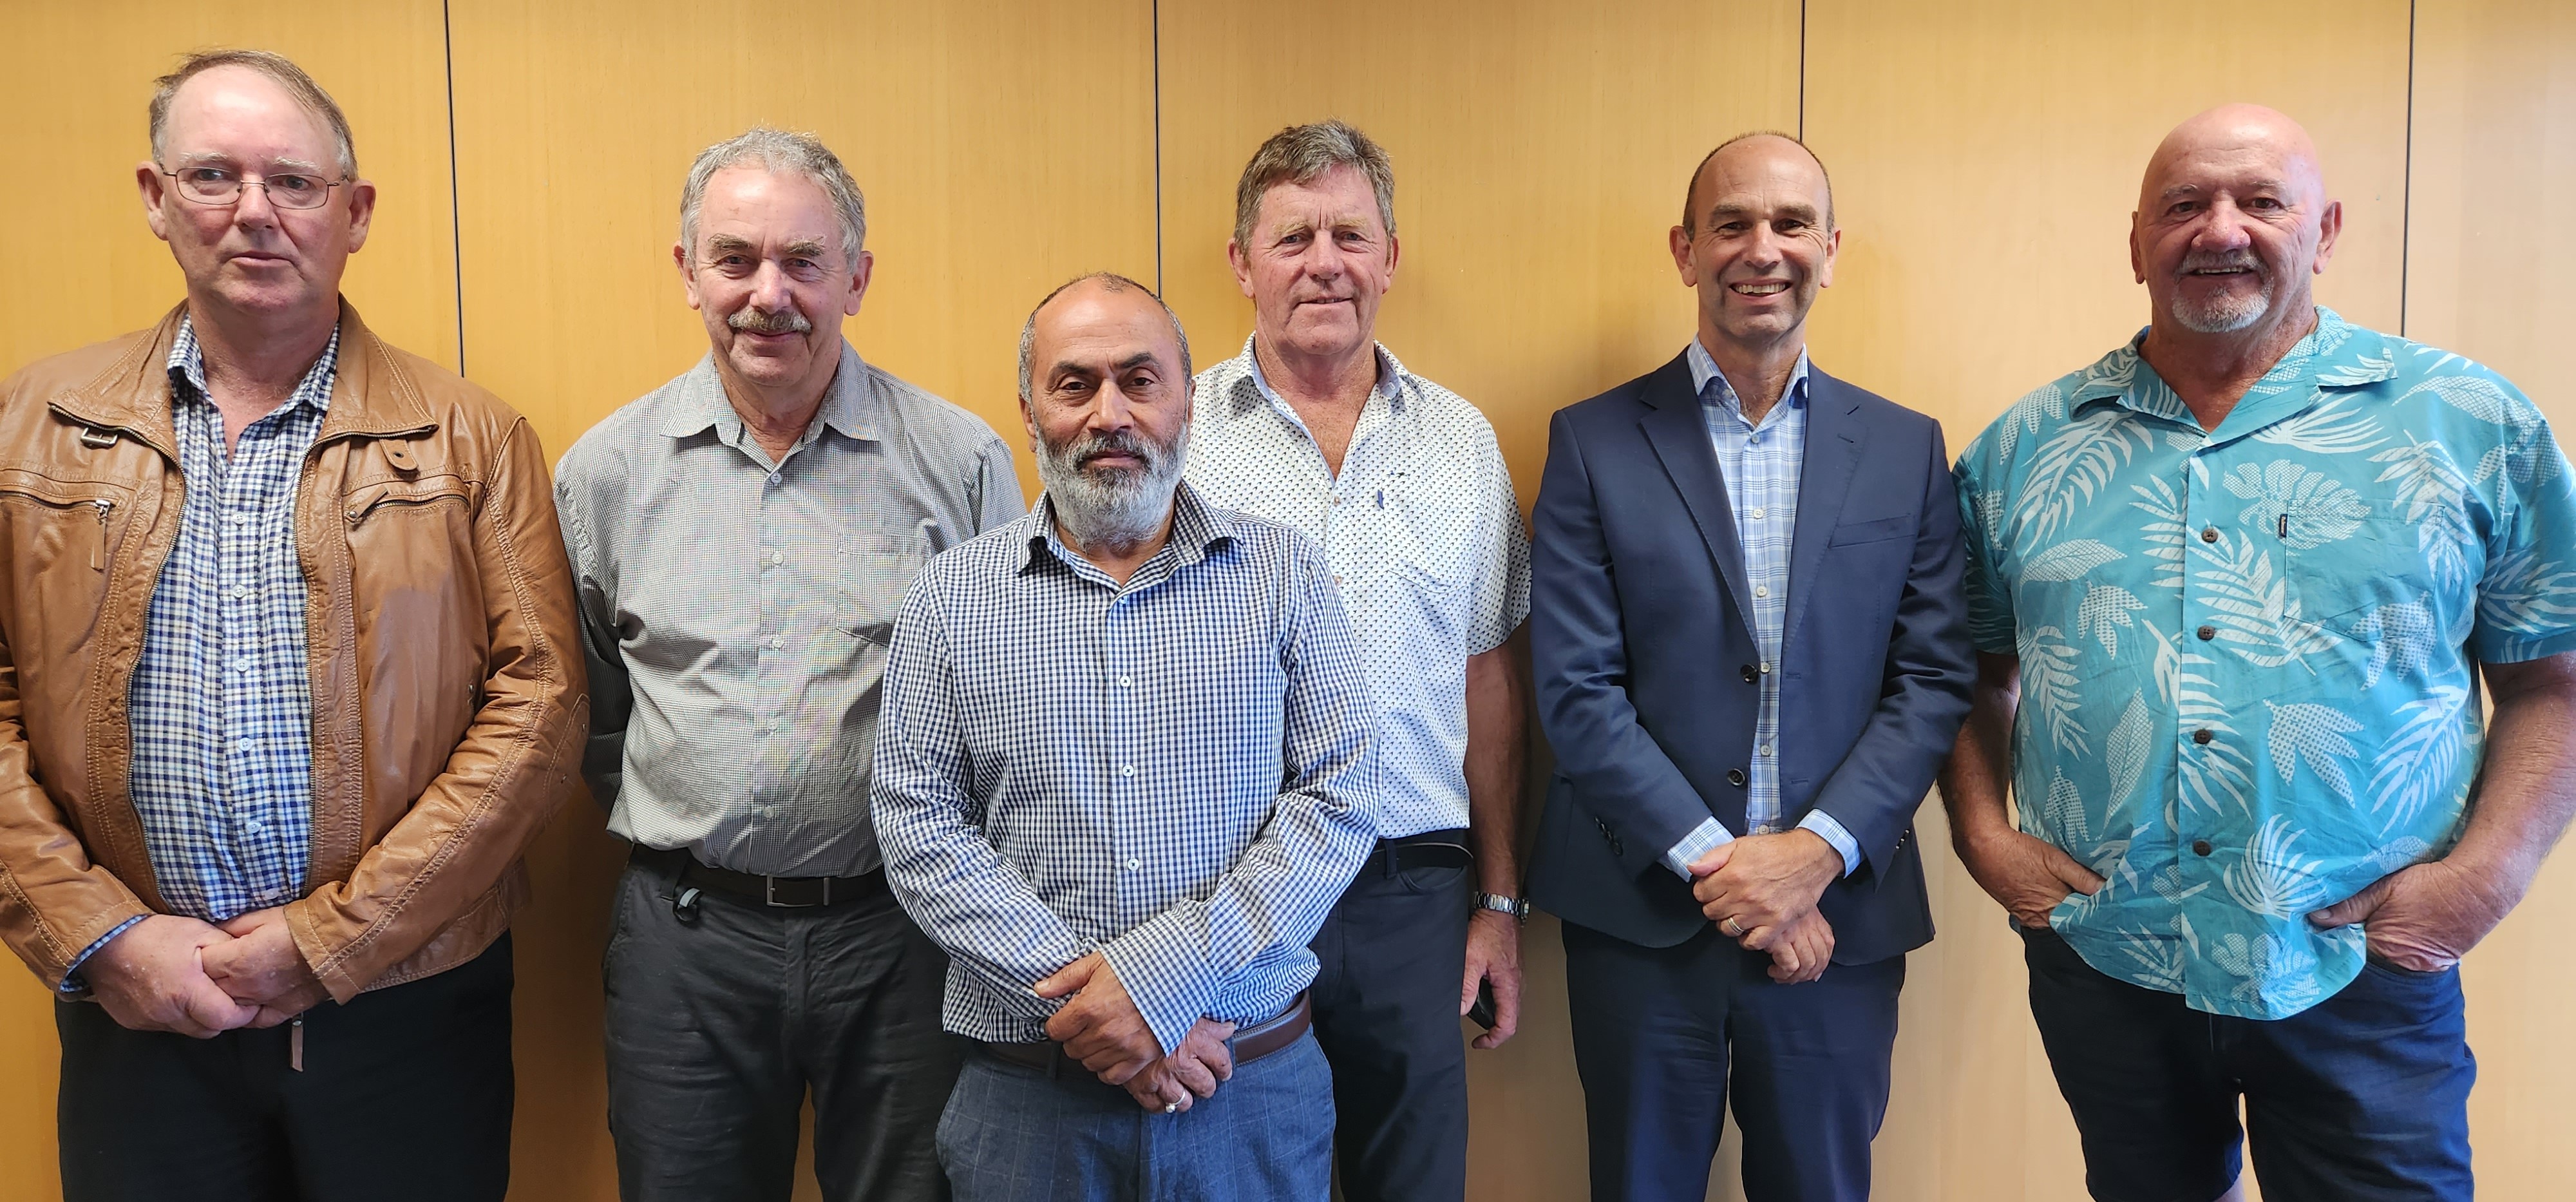 The Northland Regional Transport Committee is, from left, Deputy Chair Cr John Blackwell, (Northland Regional Council) Chair Joe Carr, (NRC), Cr Ash Nayyar (Kaipara District Council), Cr Steve McNally (Far North District Council), Steve Mutton (Waka Kotahi) and Cr Simon Reid (Whangarei District Council).